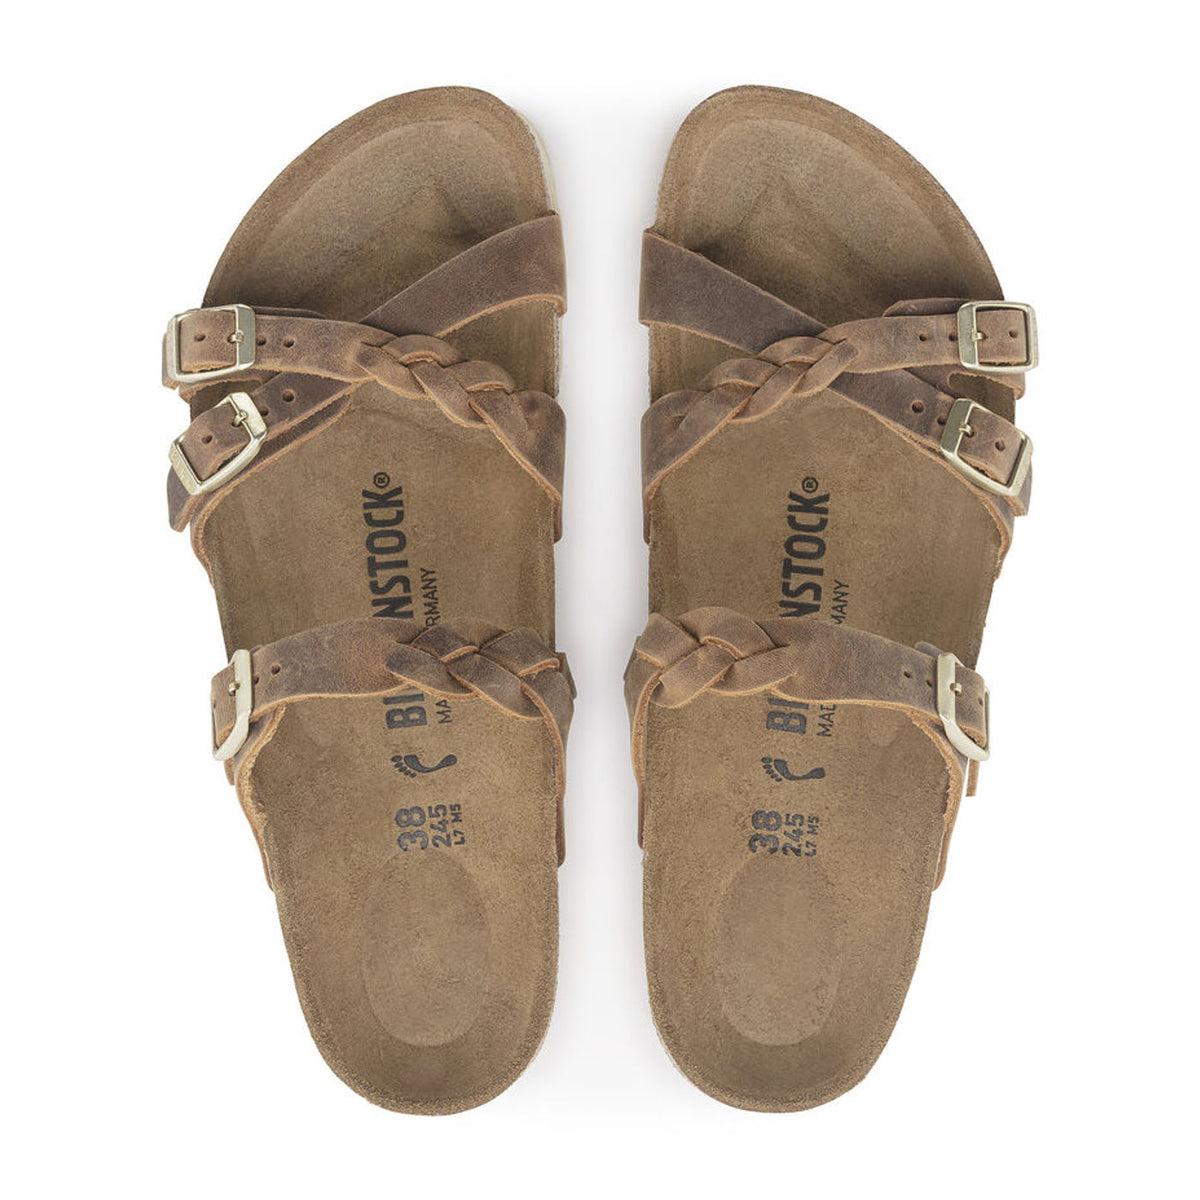 A pair of Birkenstock Franca Braid Cognac sandals with adjustable buckles, viewed from above, displaying visible size markings on the insole.